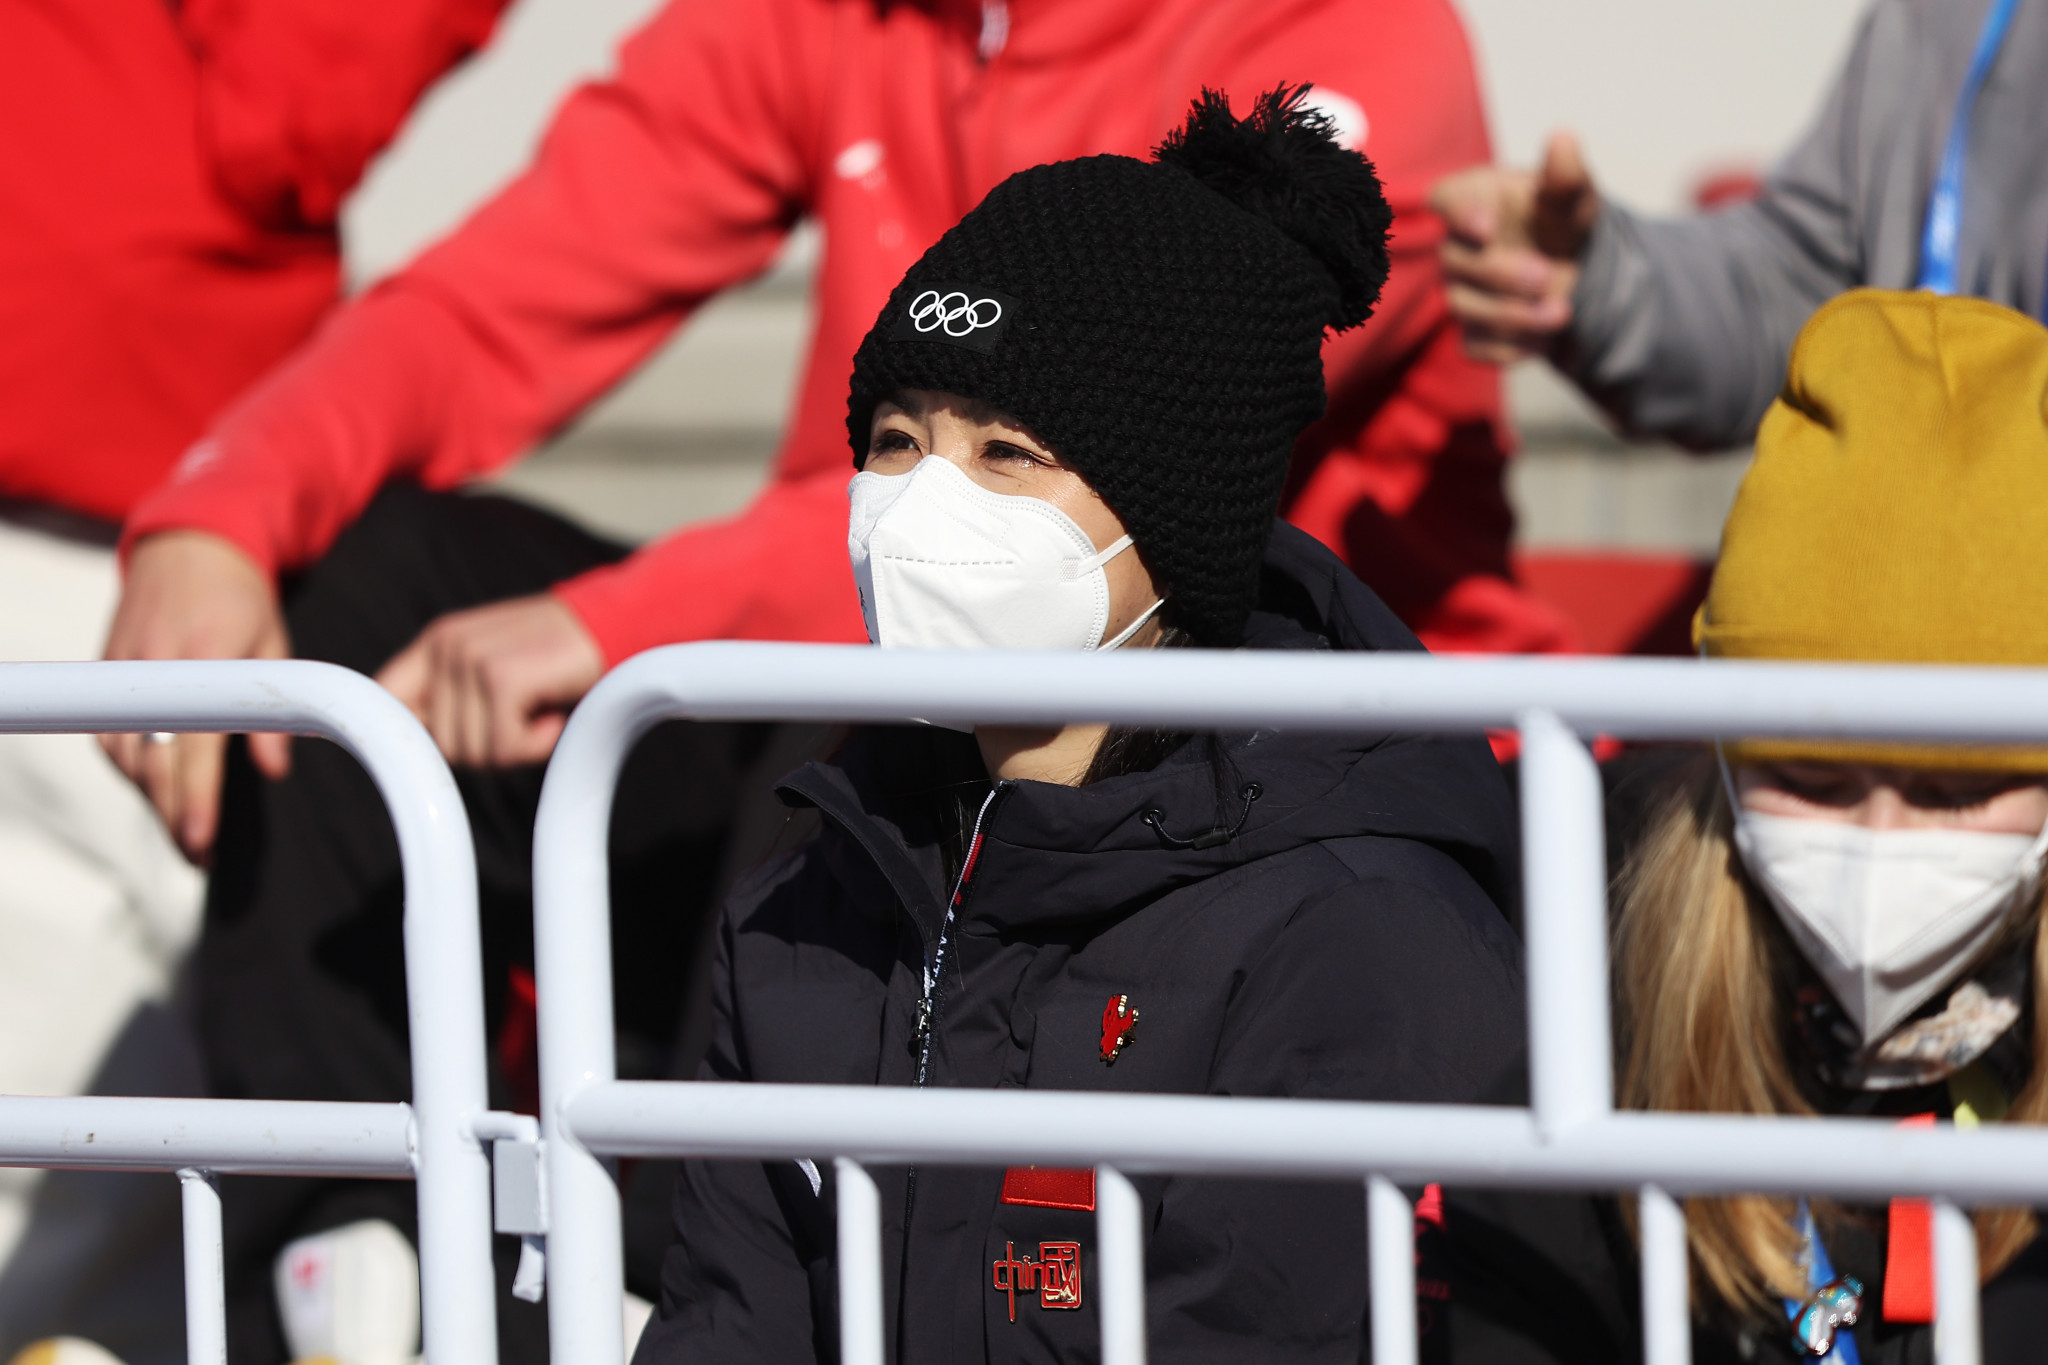 Peng Shuai was spotted watching the women's freeski big air final today ©Getty Images